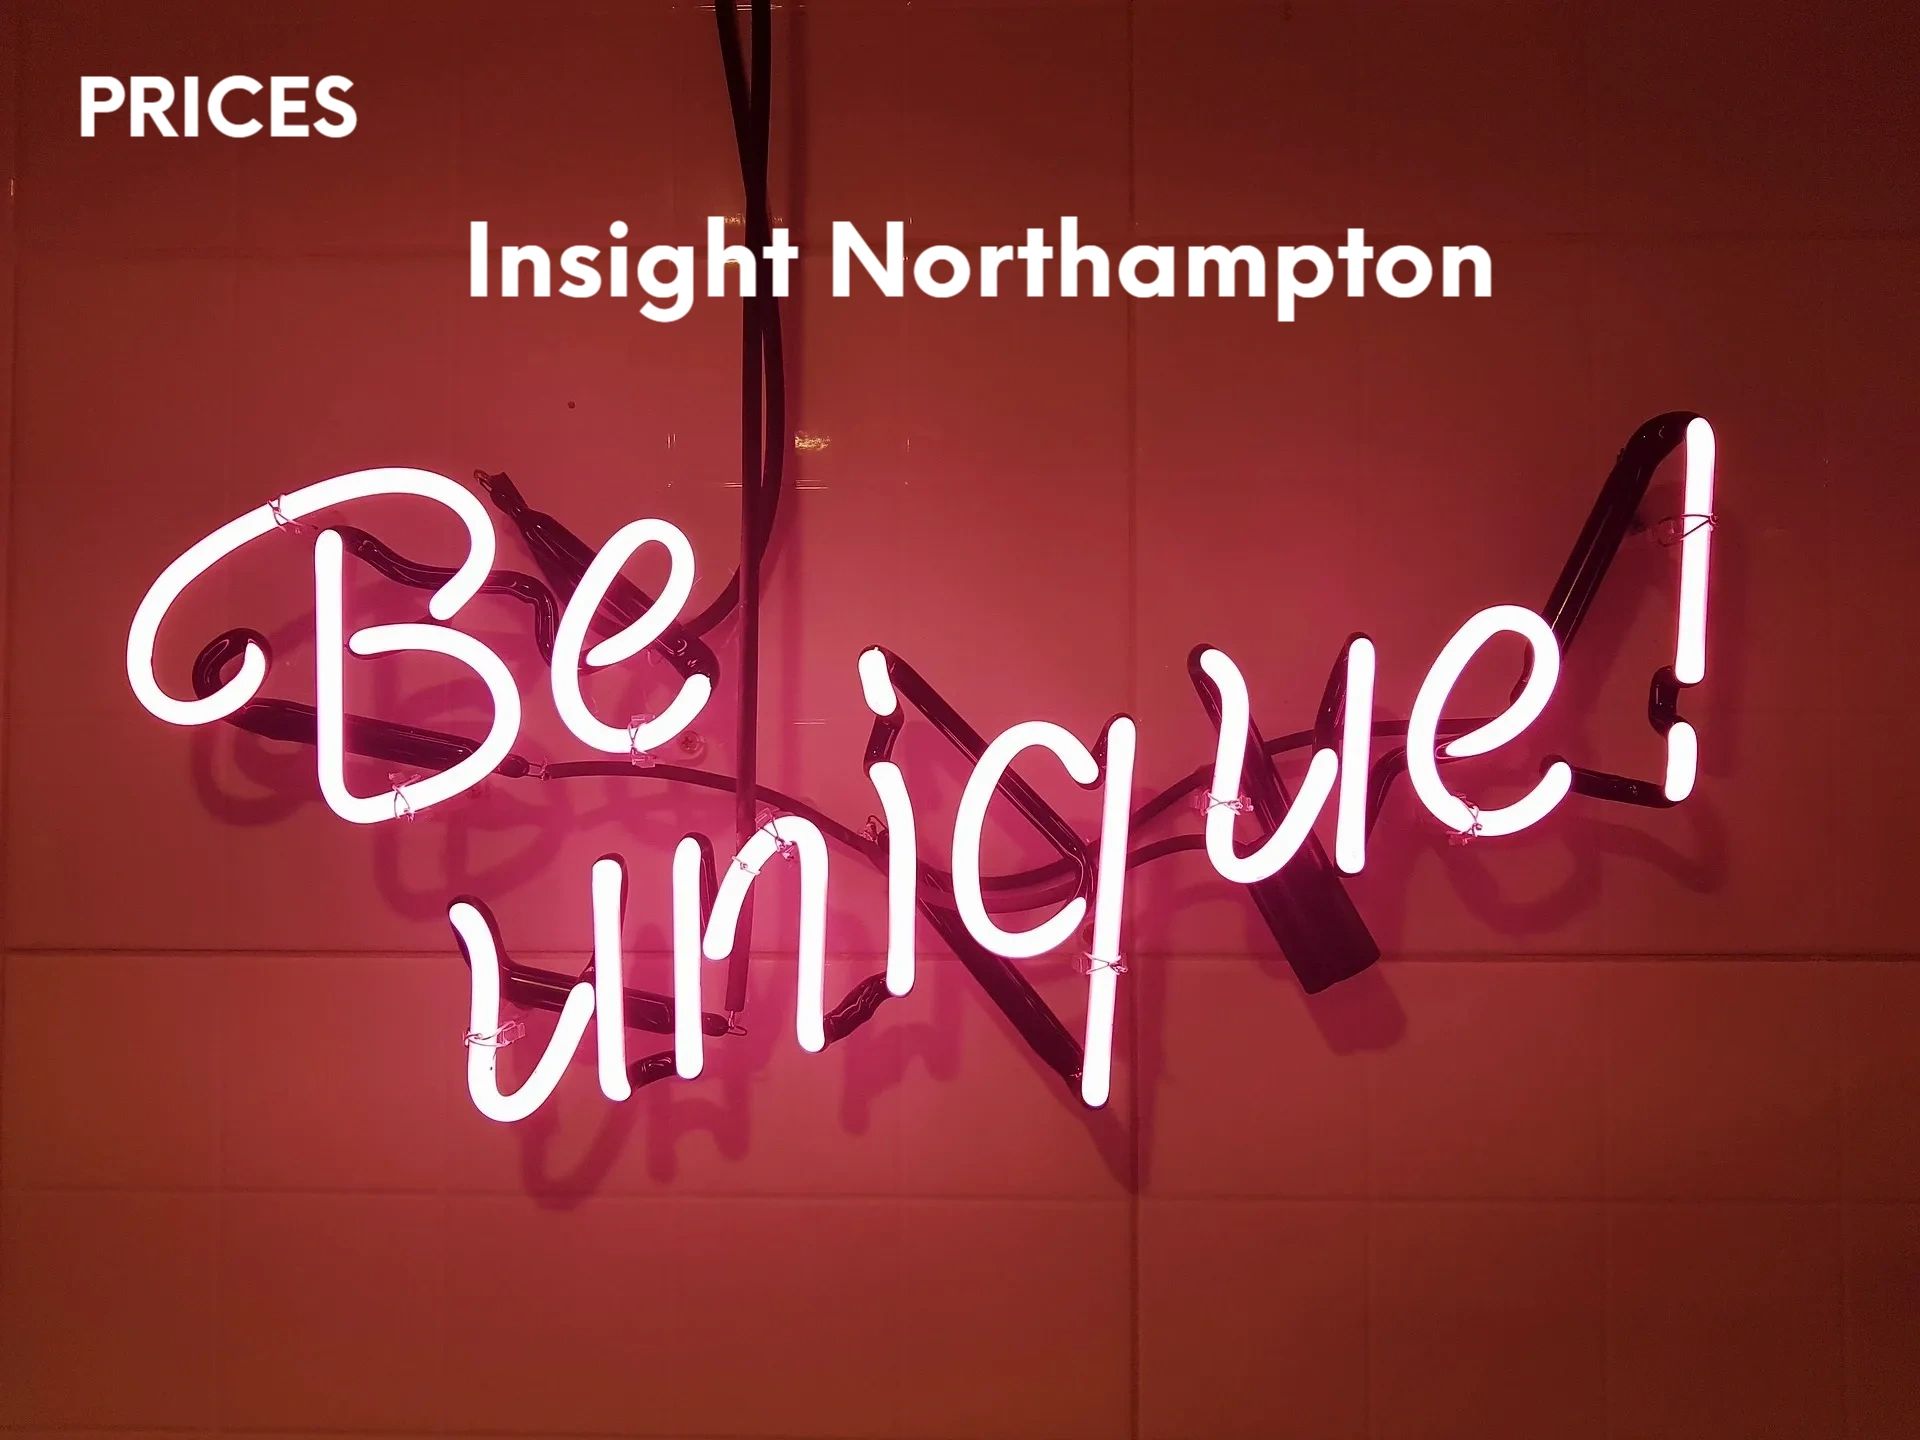 Insight Northampton  - affordable counselling services around Northamptonshire